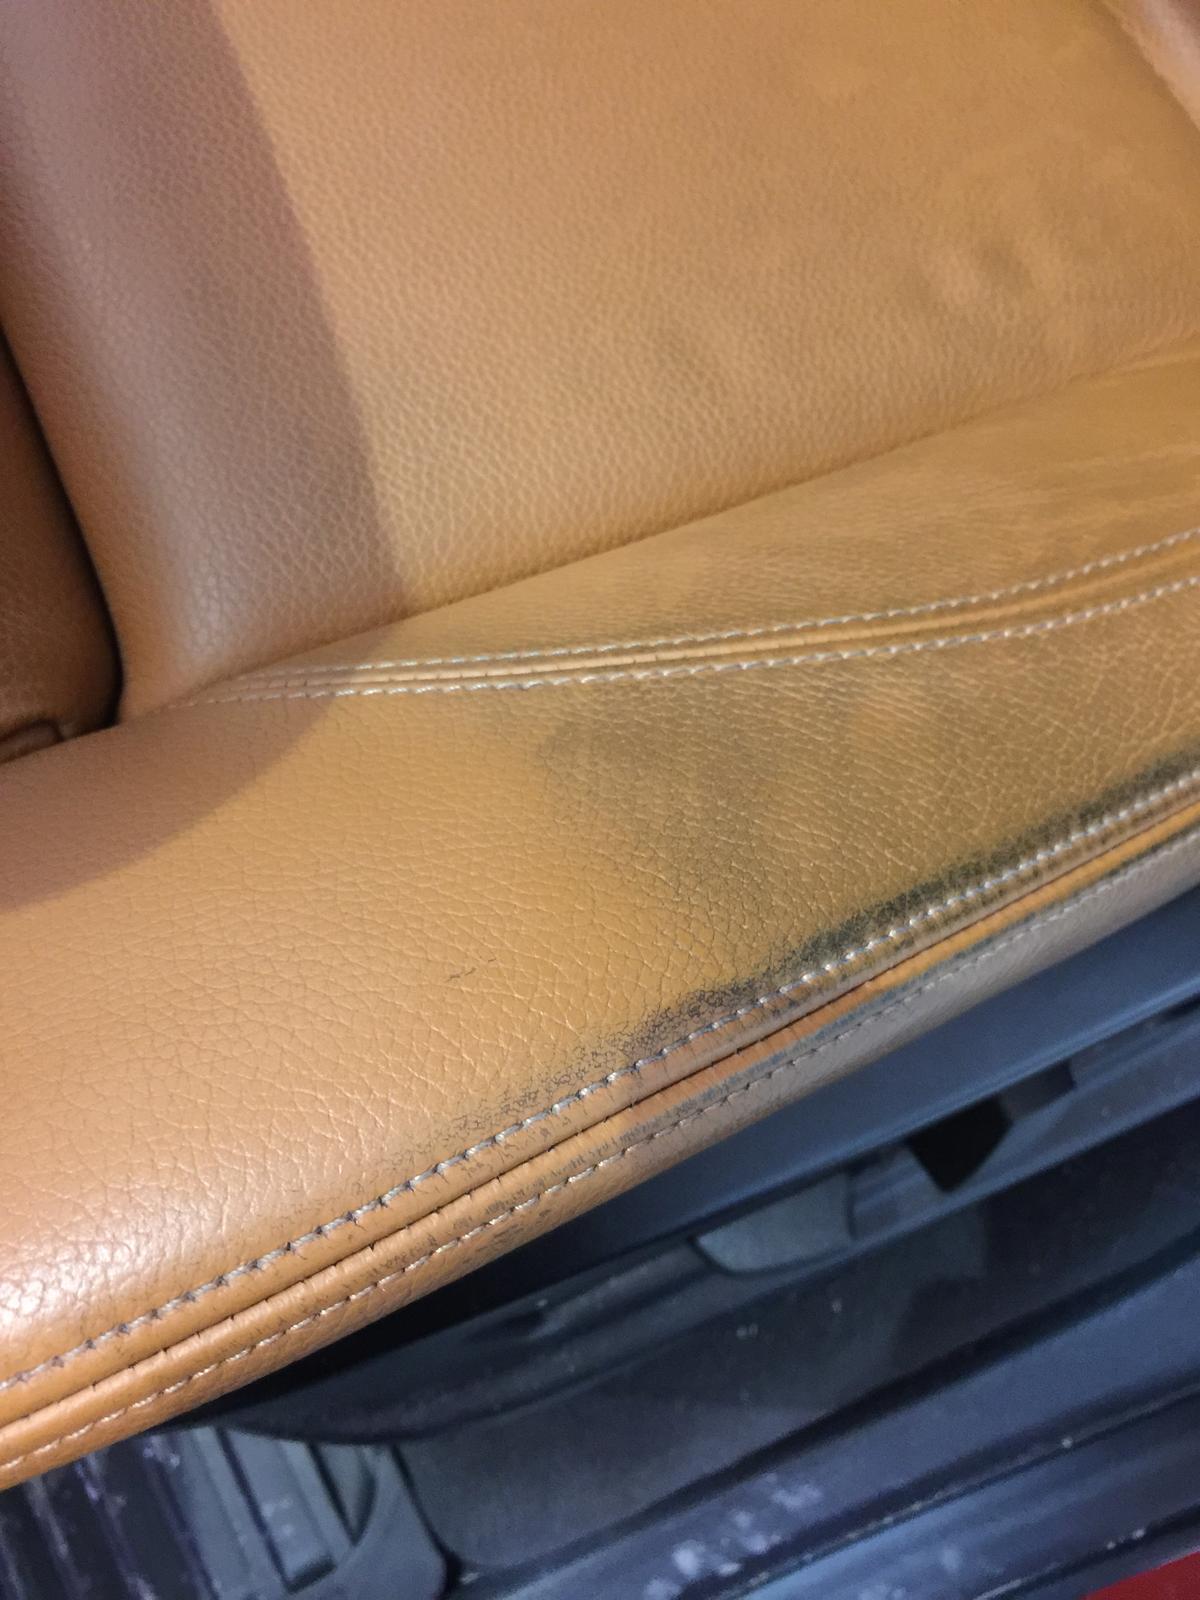 Perforated Seat Cleaning - Page 2 - Rennlist - Porsche Discussion 